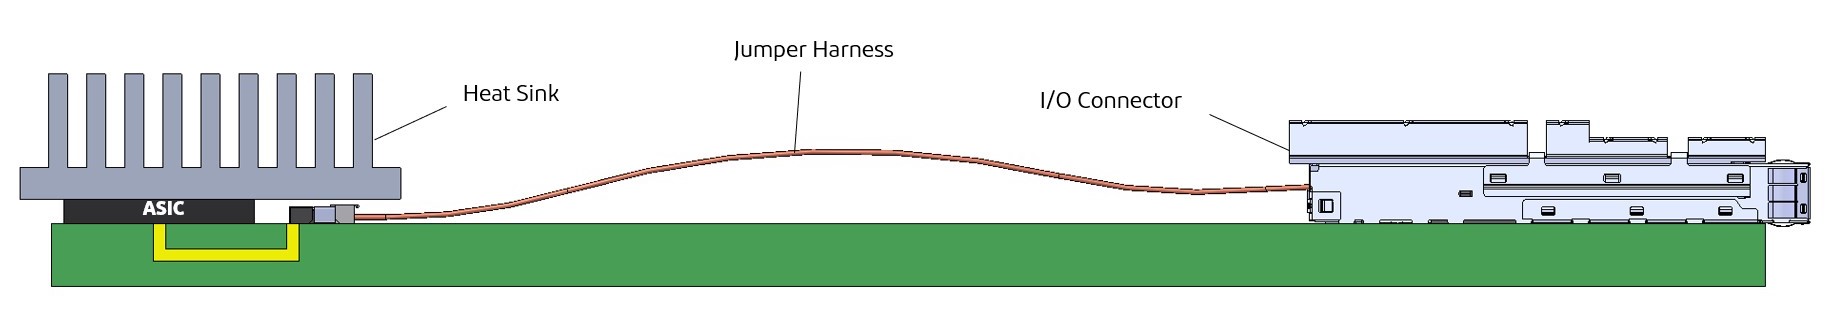 Jumper harness transmission from ASIC to IO.jpg